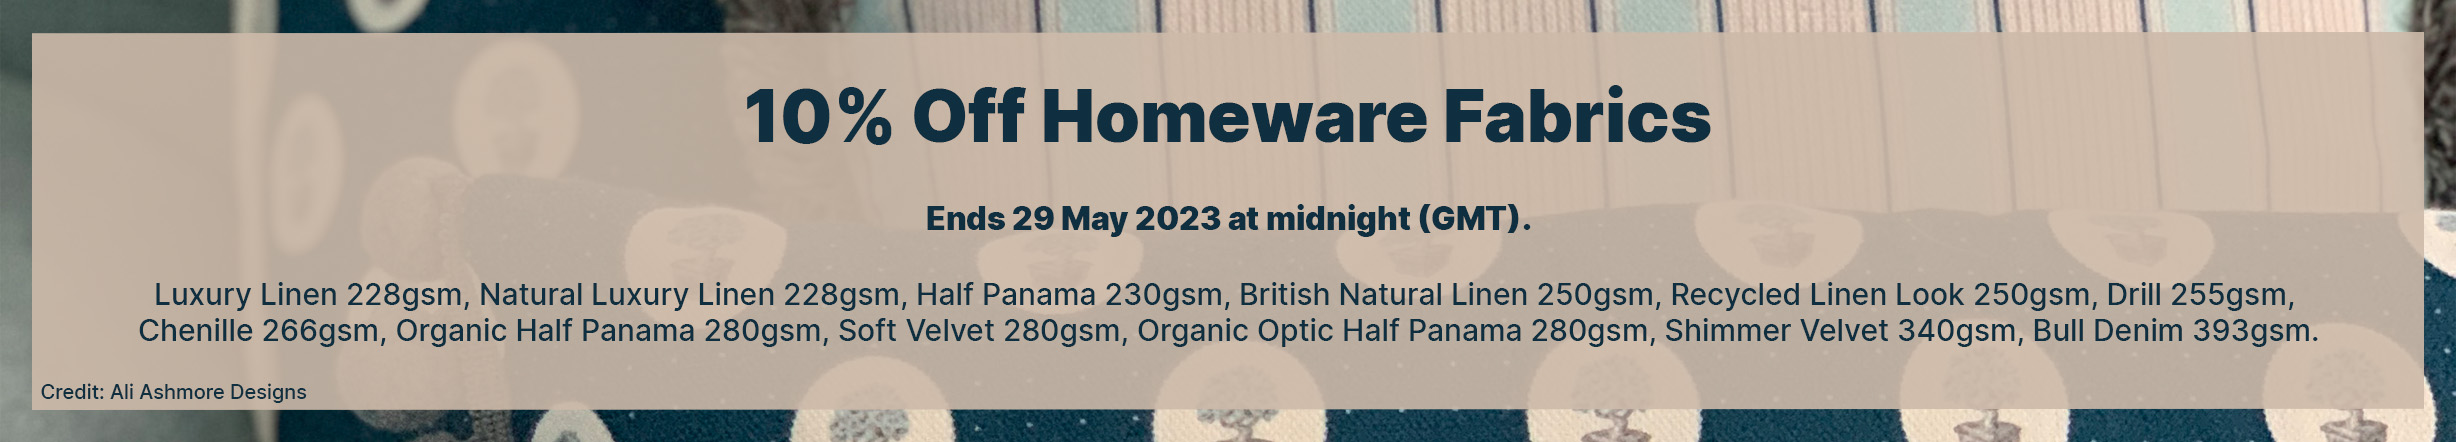  10% Off Homeware! Ends 29 May 2023 at midnight (GMT). Selected fabrics and exclusions apply. Discounts cannot be used in conjunction with any other discount, offer or promotion, are non-transferable and cannot be applied retrospectively. 